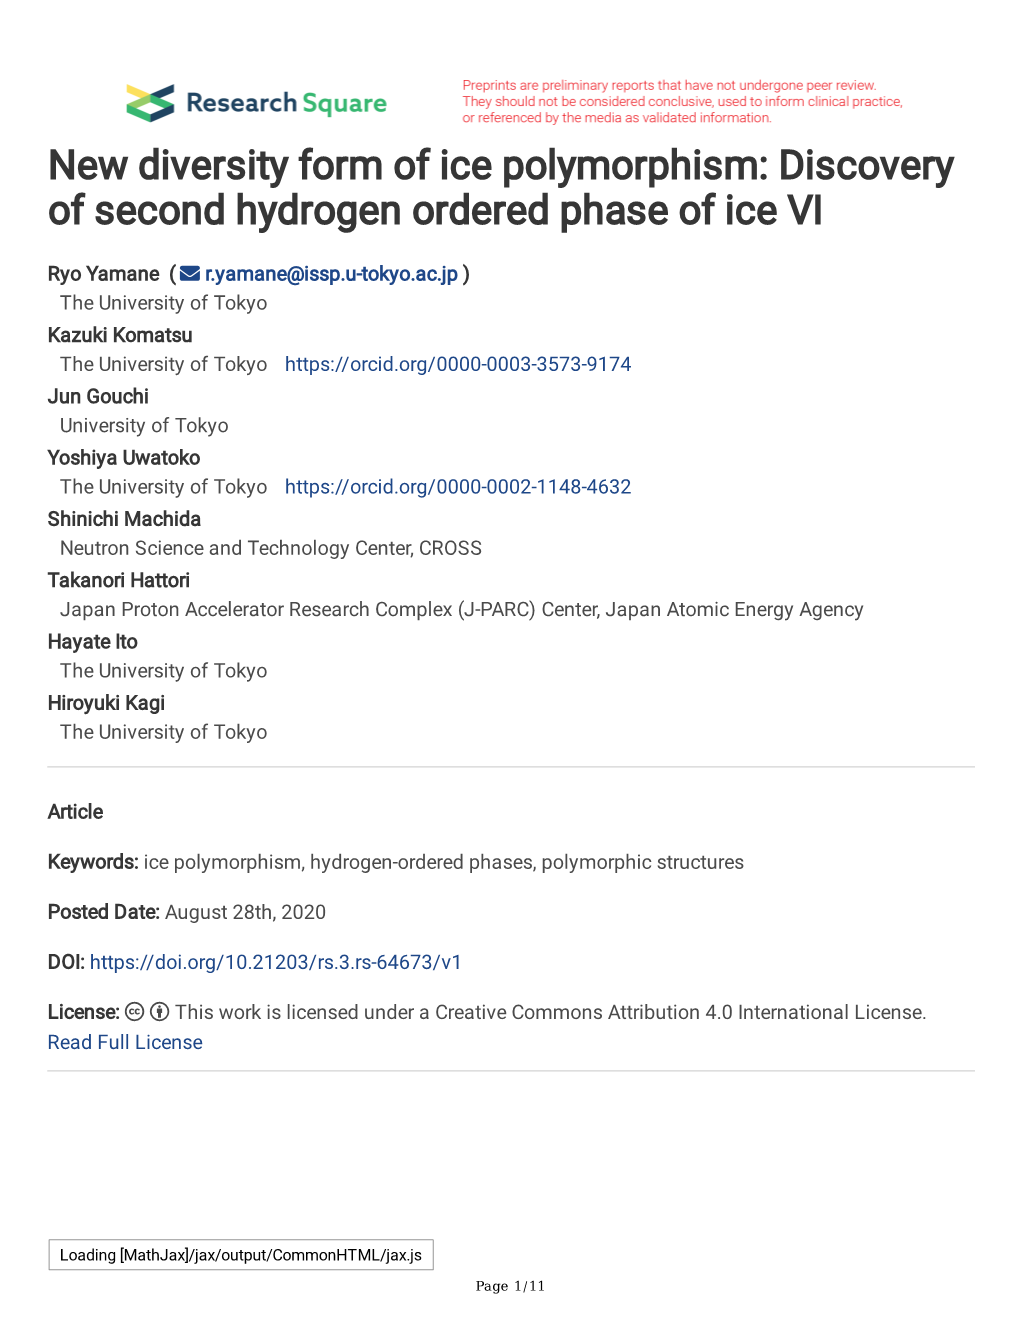 Discovery of Second Hydrogen Ordered Phase of Ice VI